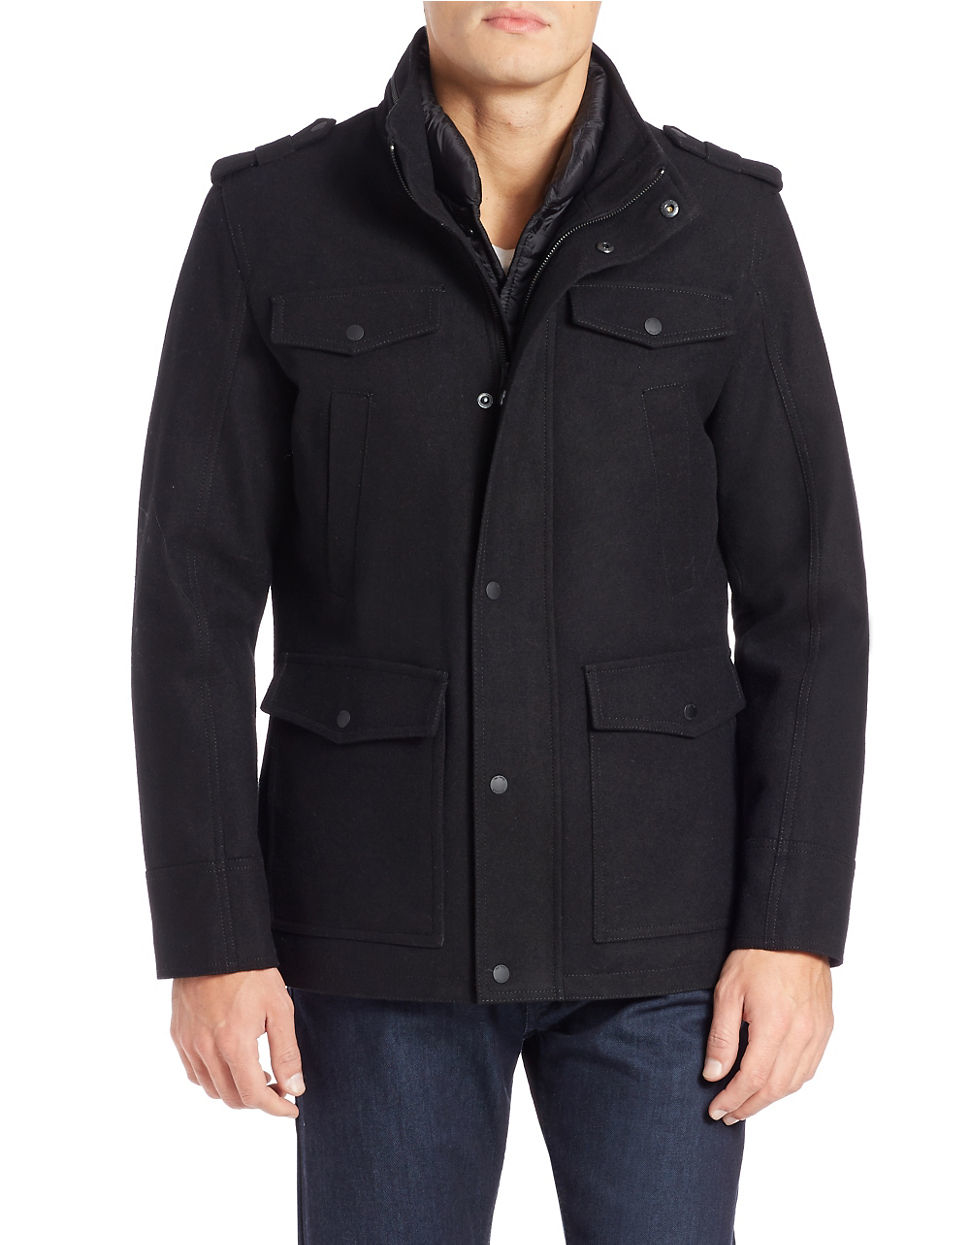 Guess Wool Blend Jacket With Removable Bib in Black for Men - Lyst